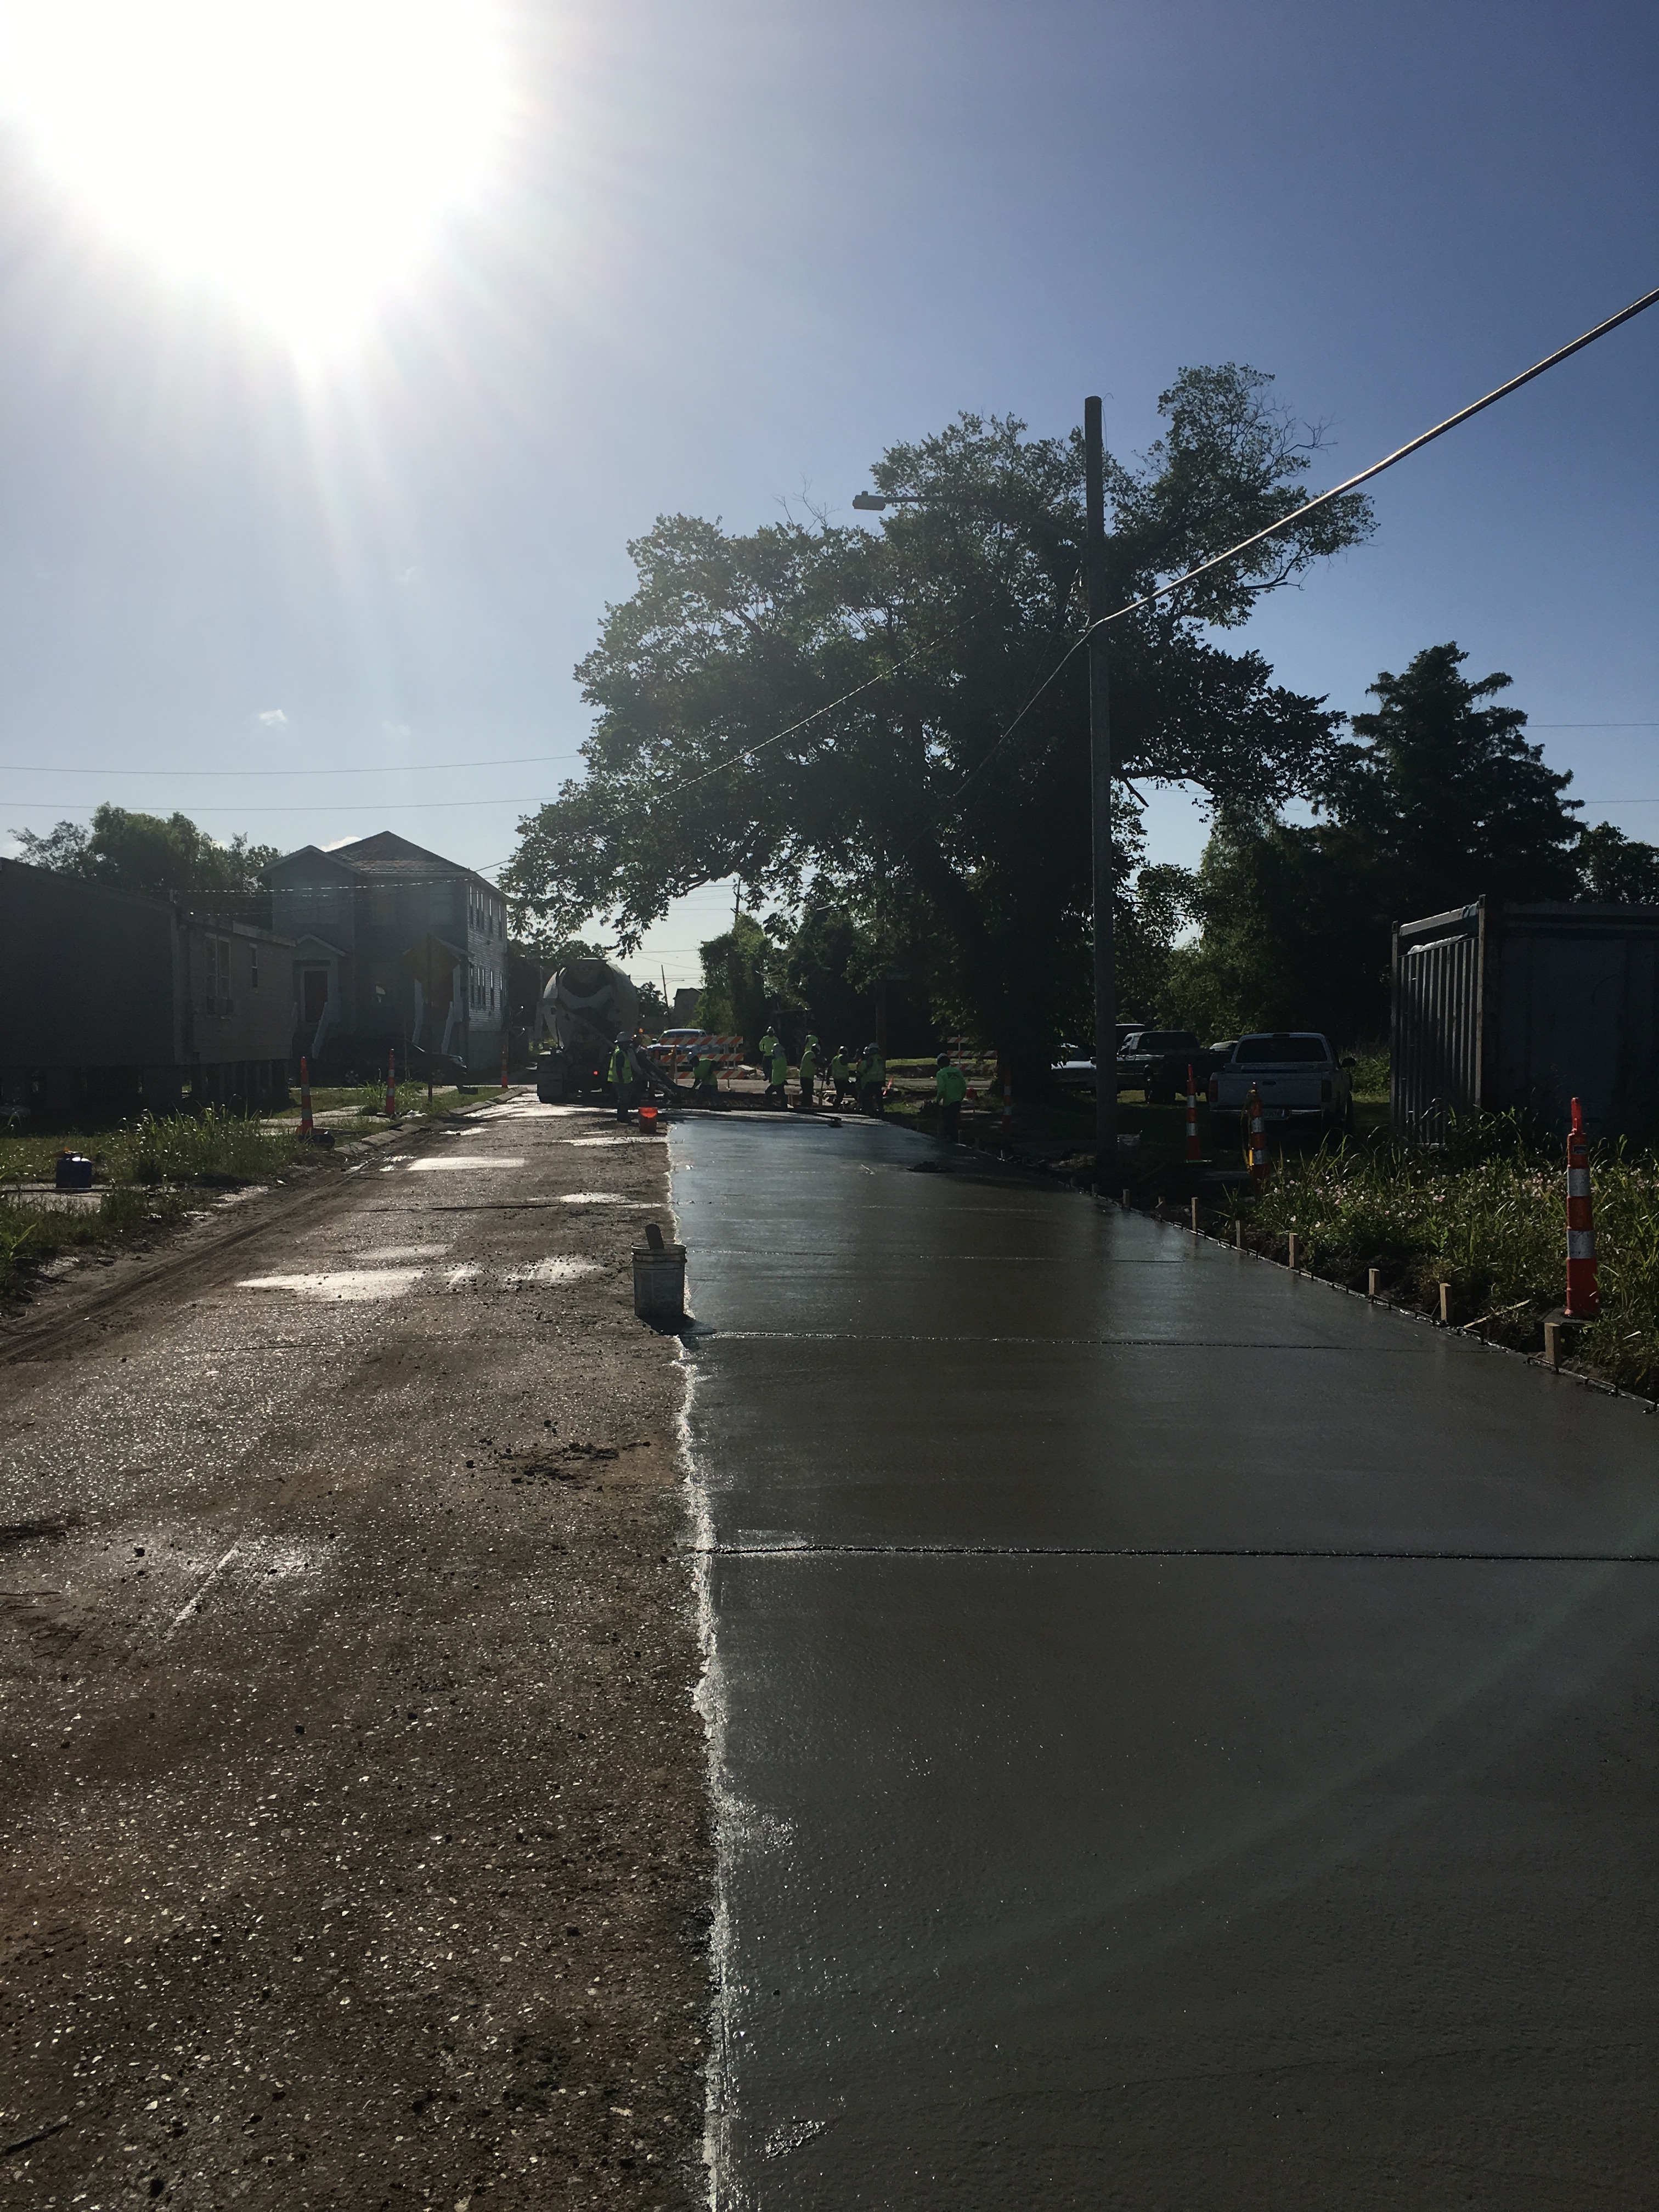 THE LOWER NINTH WARD NORTHEAST GROUP A PROJECT COMPLETES TWO STREETS